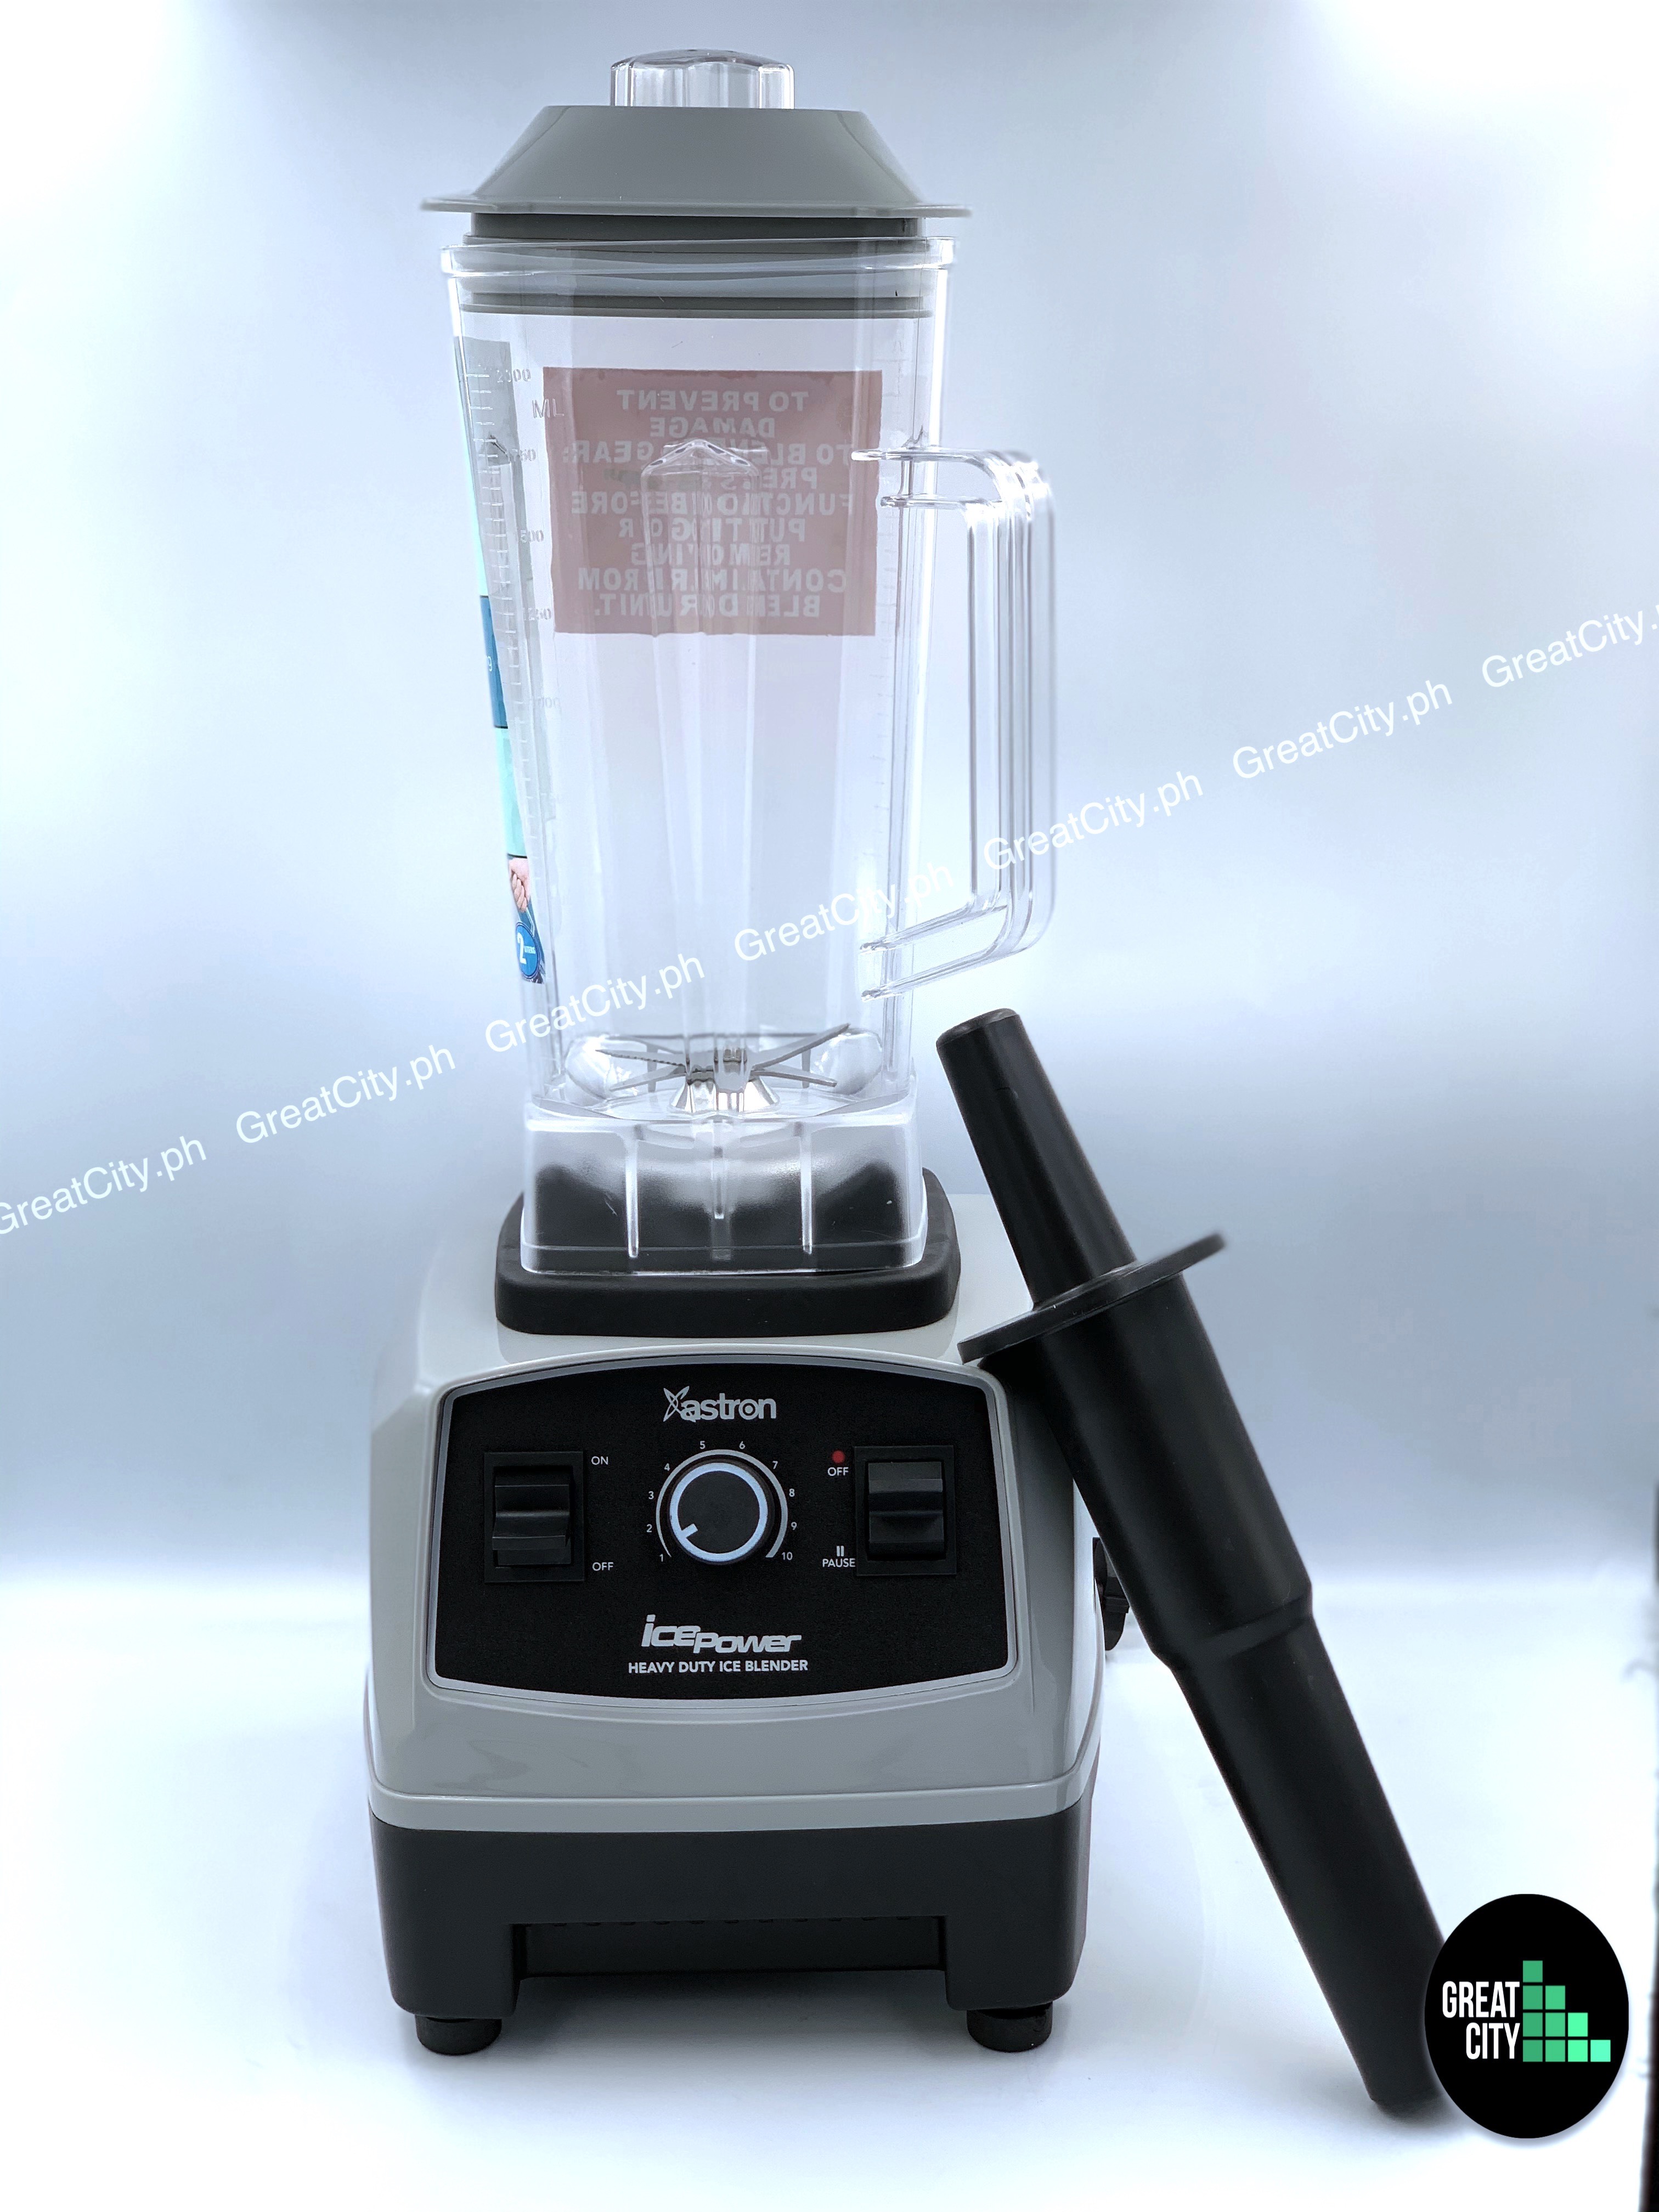 Introducing Astron's most powerful blender yet, the Ice Power blender  🧊💪🏻❄️ ❄️ all-in-one blender, ice crusher, food processor ❄️ 1500W ice-crushing, By Appliance Hub PH